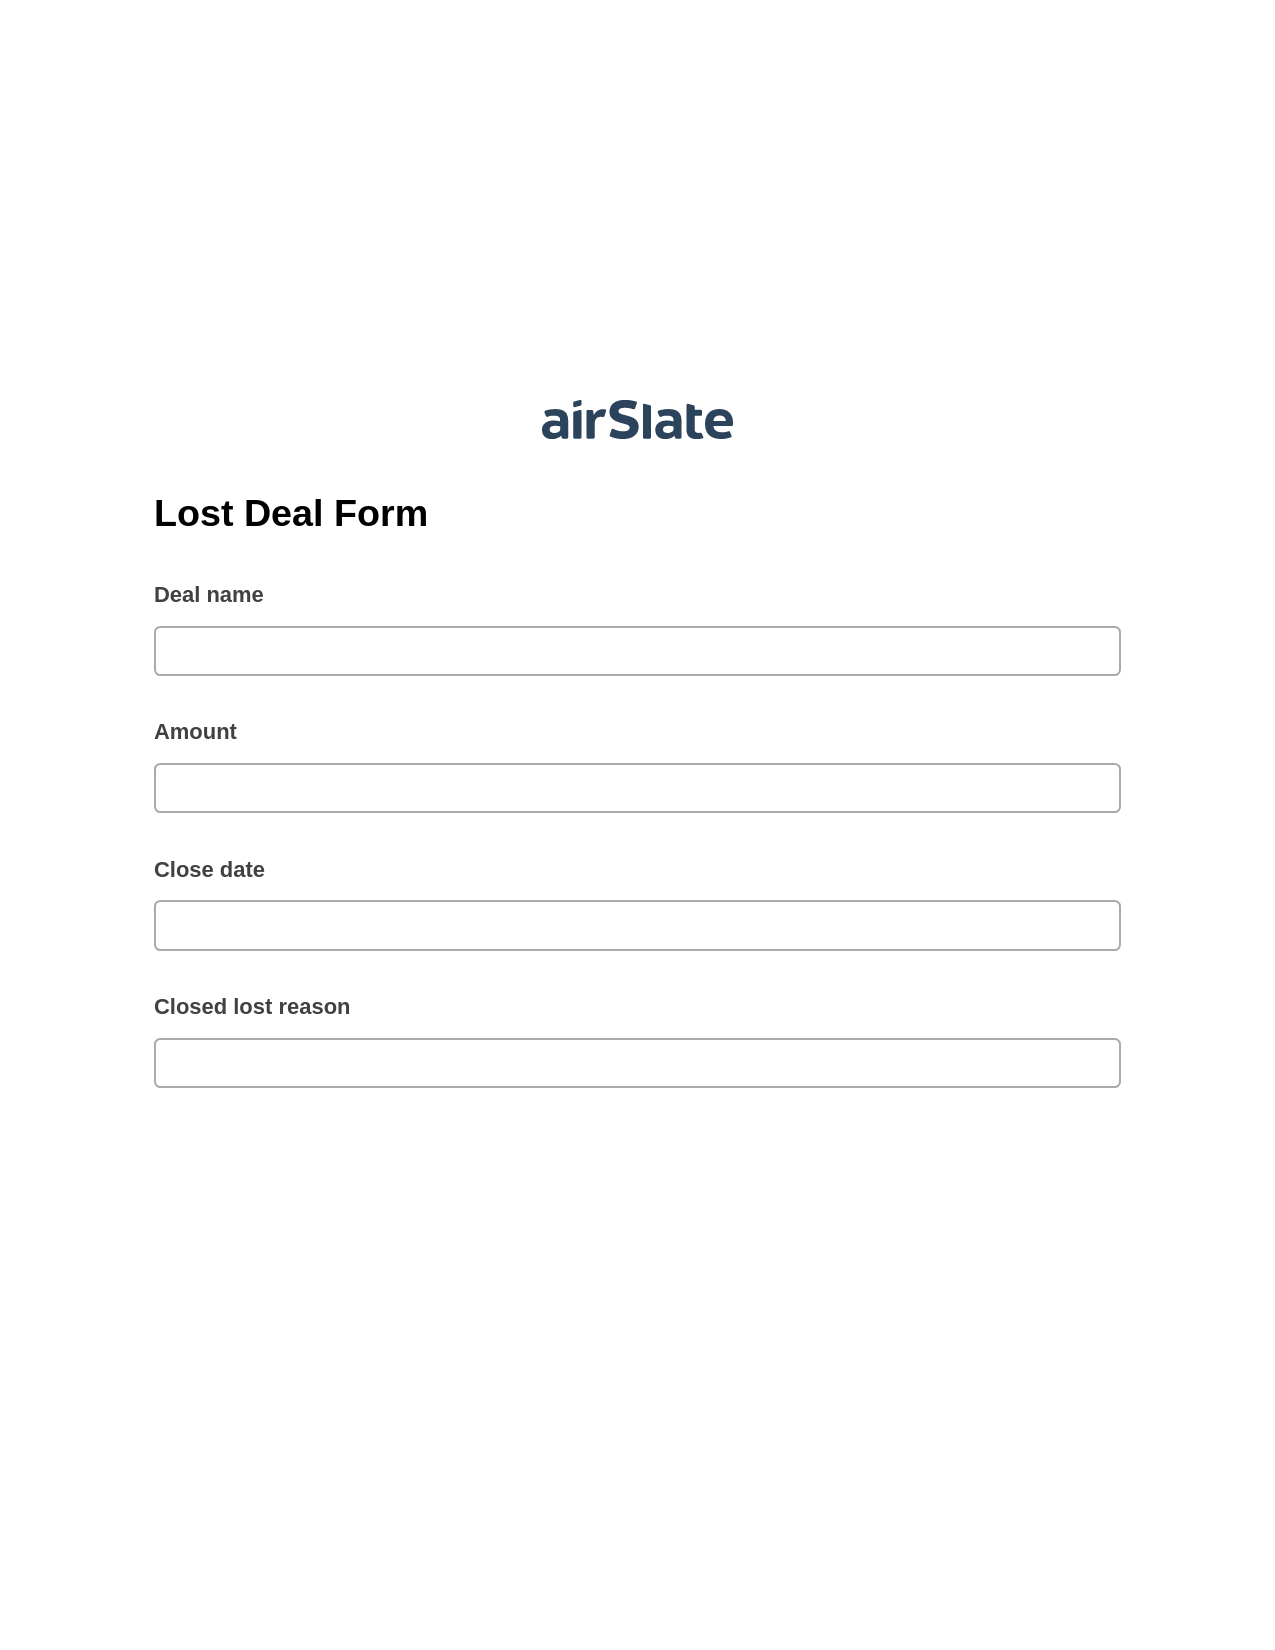 Lost Deal Form Pre-fill Dropdowns from Airtable, SendGrid send Campaign bot, Export to Excel 365 Bot